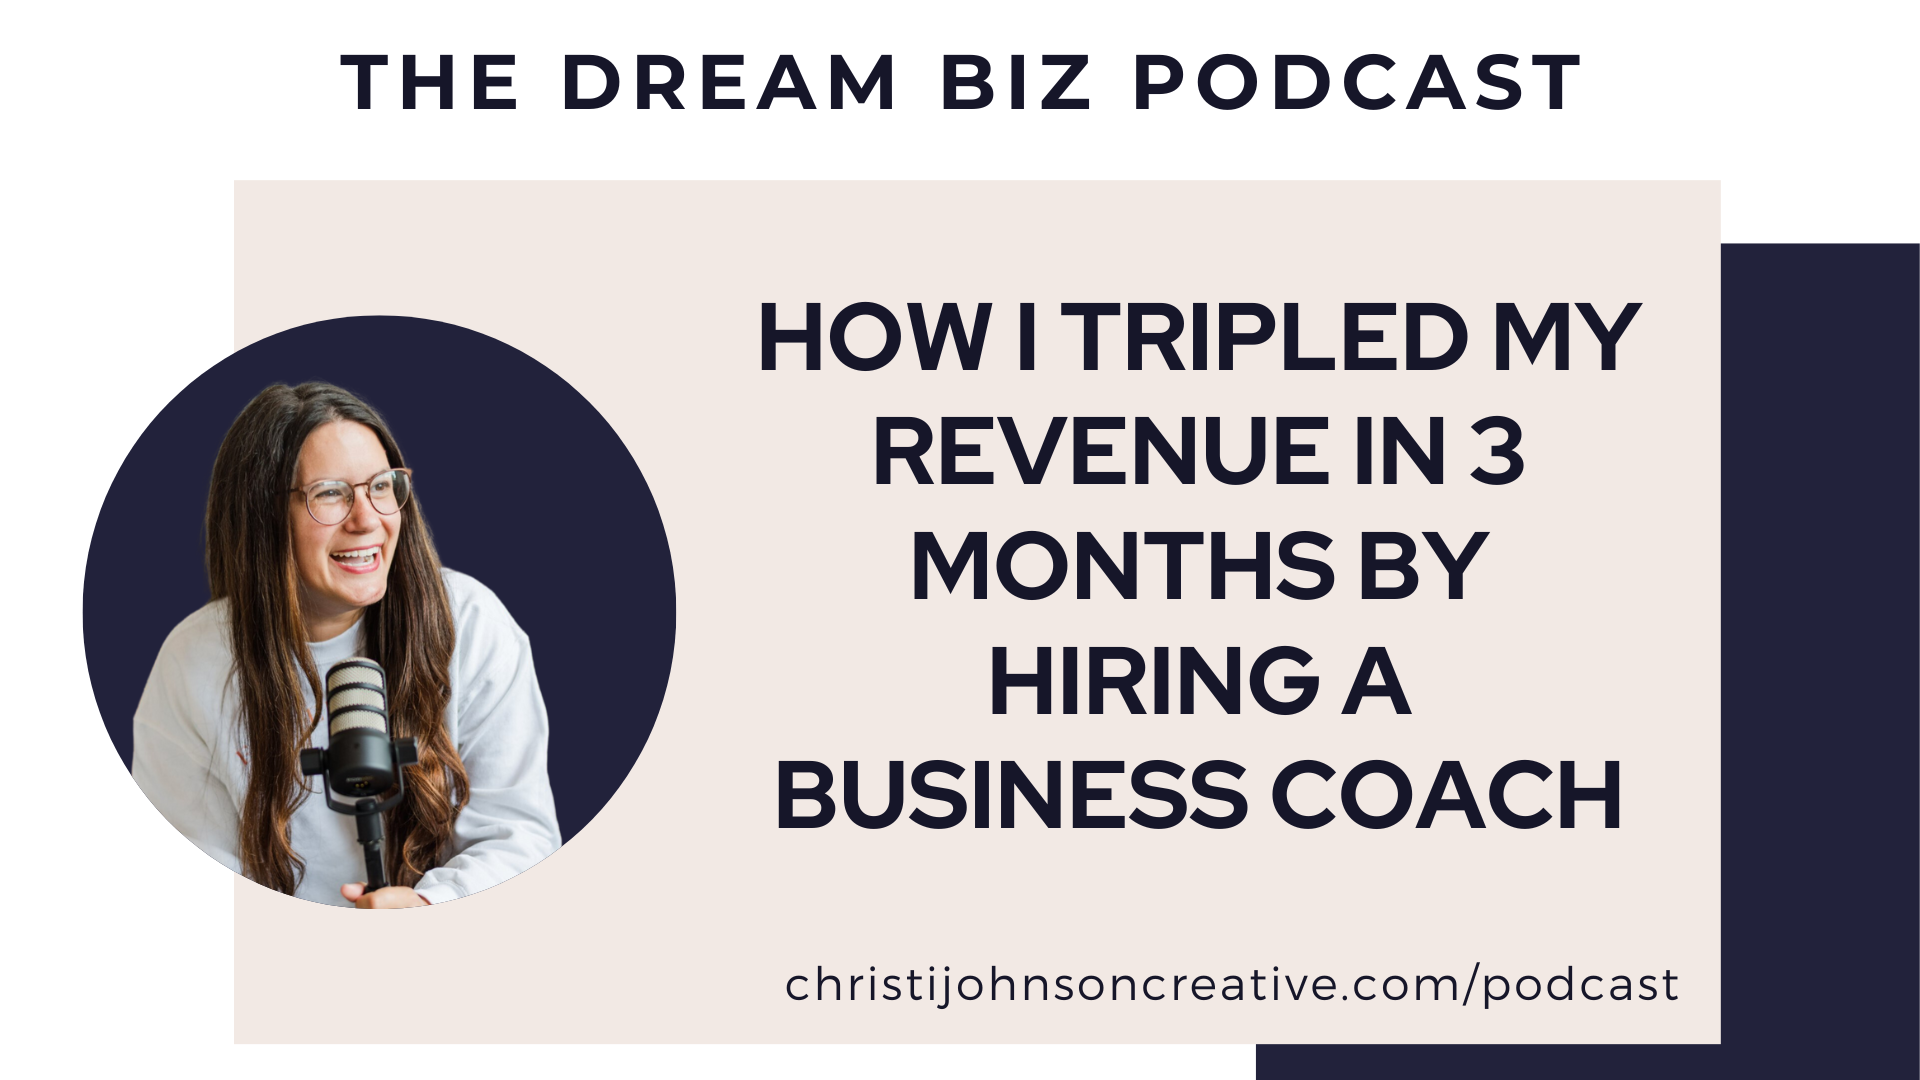 How I tripled my revenue in 3 months by hiring a business coach is written in purple text on a tan background. There is a photo of Christi smiling off to the right and holding a microphone.